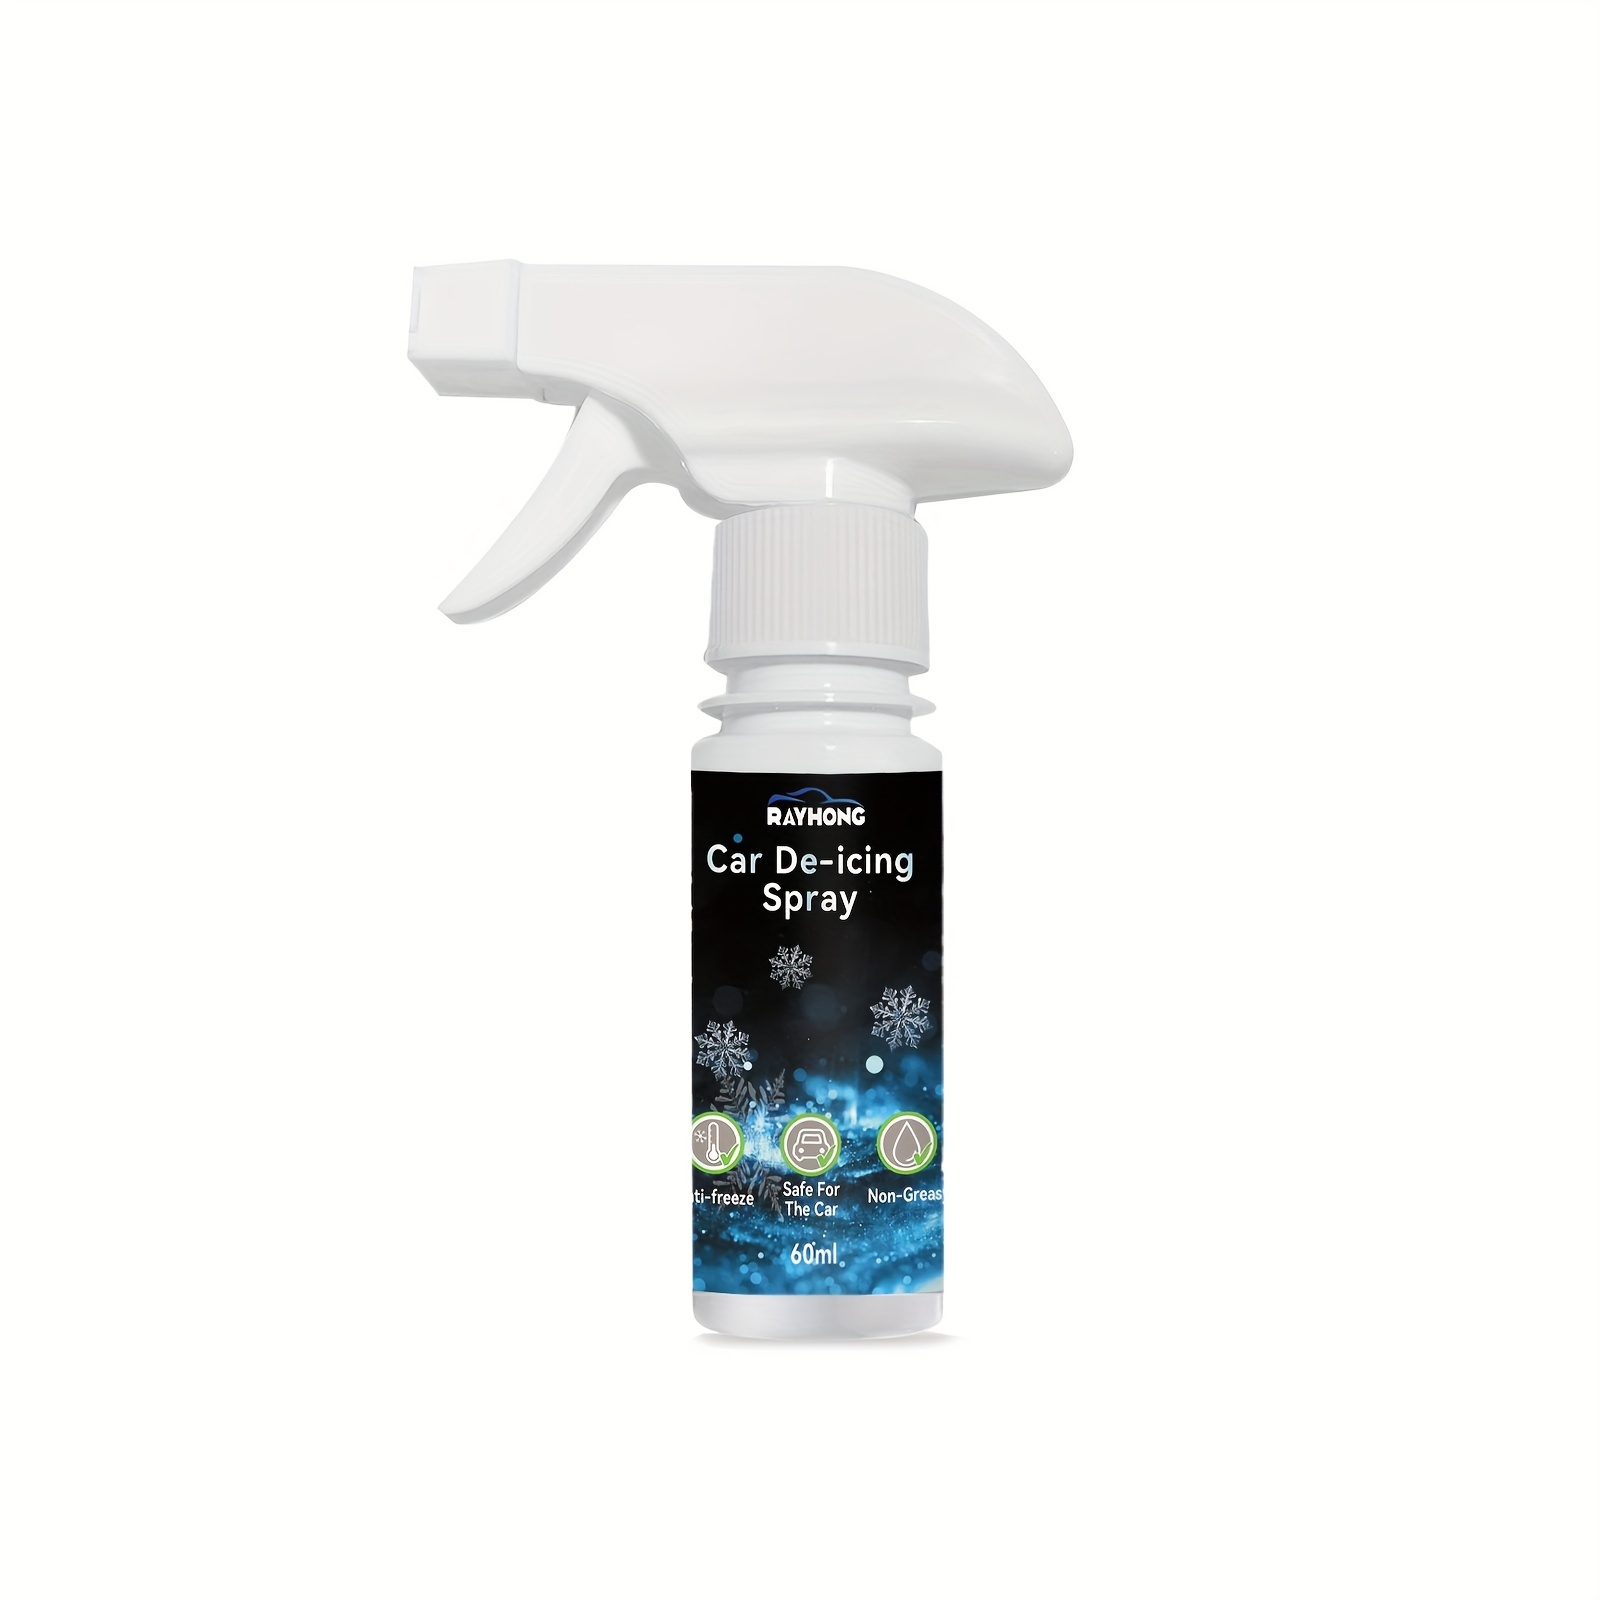  Snow Melting Spray Deicing Agent for Car Windshields, Windows,  Mirrors, Windshield Deicer Spray Snow Melting Defrost Liquid for Snow Ice  Fast Melting Spray Defrosting Anti Frost Spray (3pcs) : Automotive